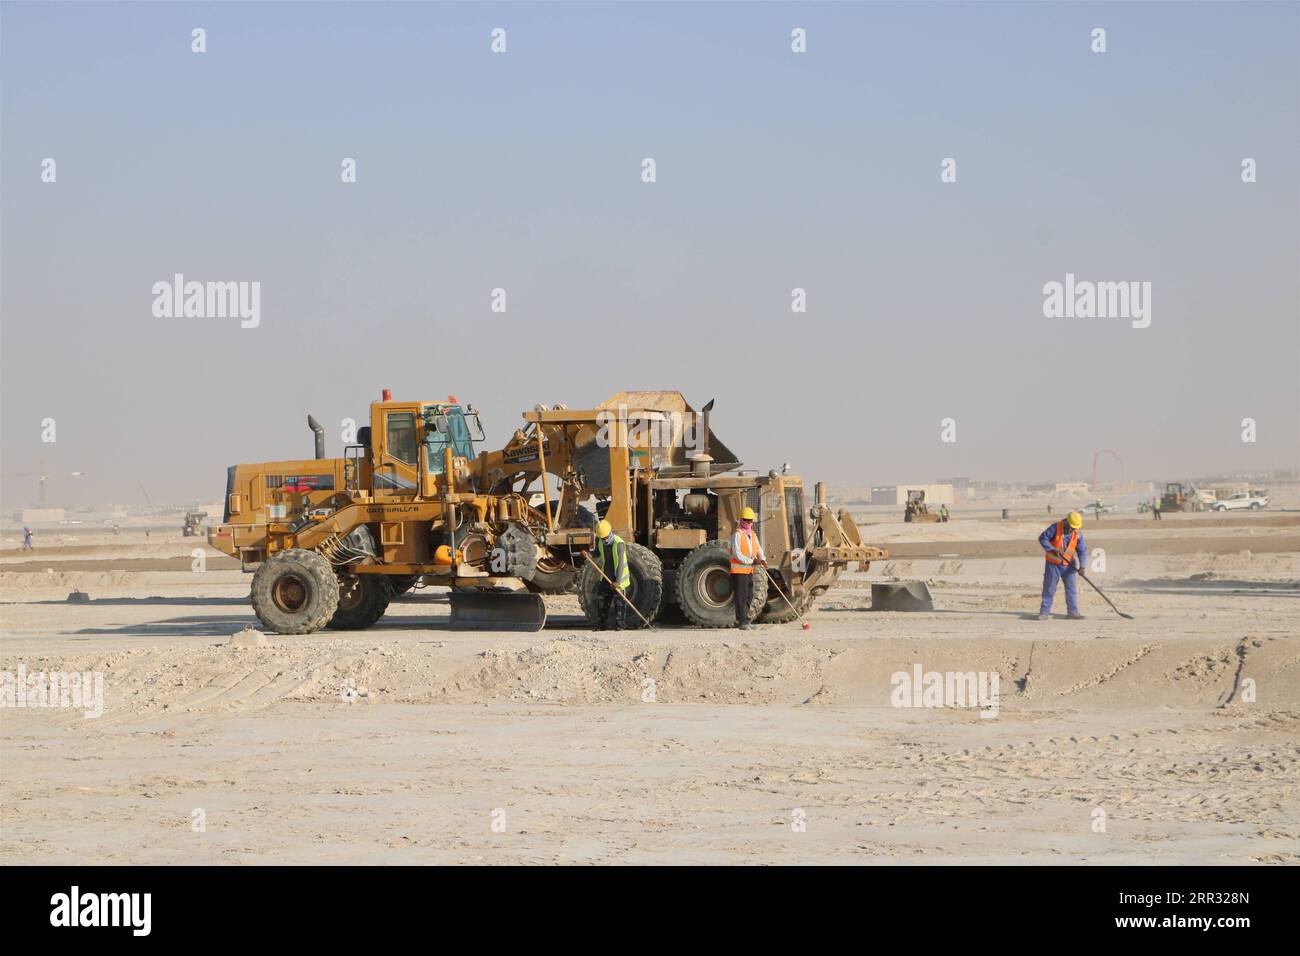 201020 -- JAHRA GOVERNORATE, Oct. 20, 2020 -- Construction machines work at the construction site of a project of China Gezhouba Group Corporation CGGC in desert of Jahra Governorate, Kuwait, Oct. 19, 2020. China Gezhouba Group Corporation CGGC handed over on Tuesday the first batch of its housing infrastructure project to the Kuwaiti side, injecting new momentum into Kuwait s economy and livelihood. Photo by /Xinhua KUWAIT-JAHRA GOVERNORATE-CHINESE COMPANY-PROJECT LiuxLianghaoyue PUBLICATIONxNOTxINxCHN Stock Photo